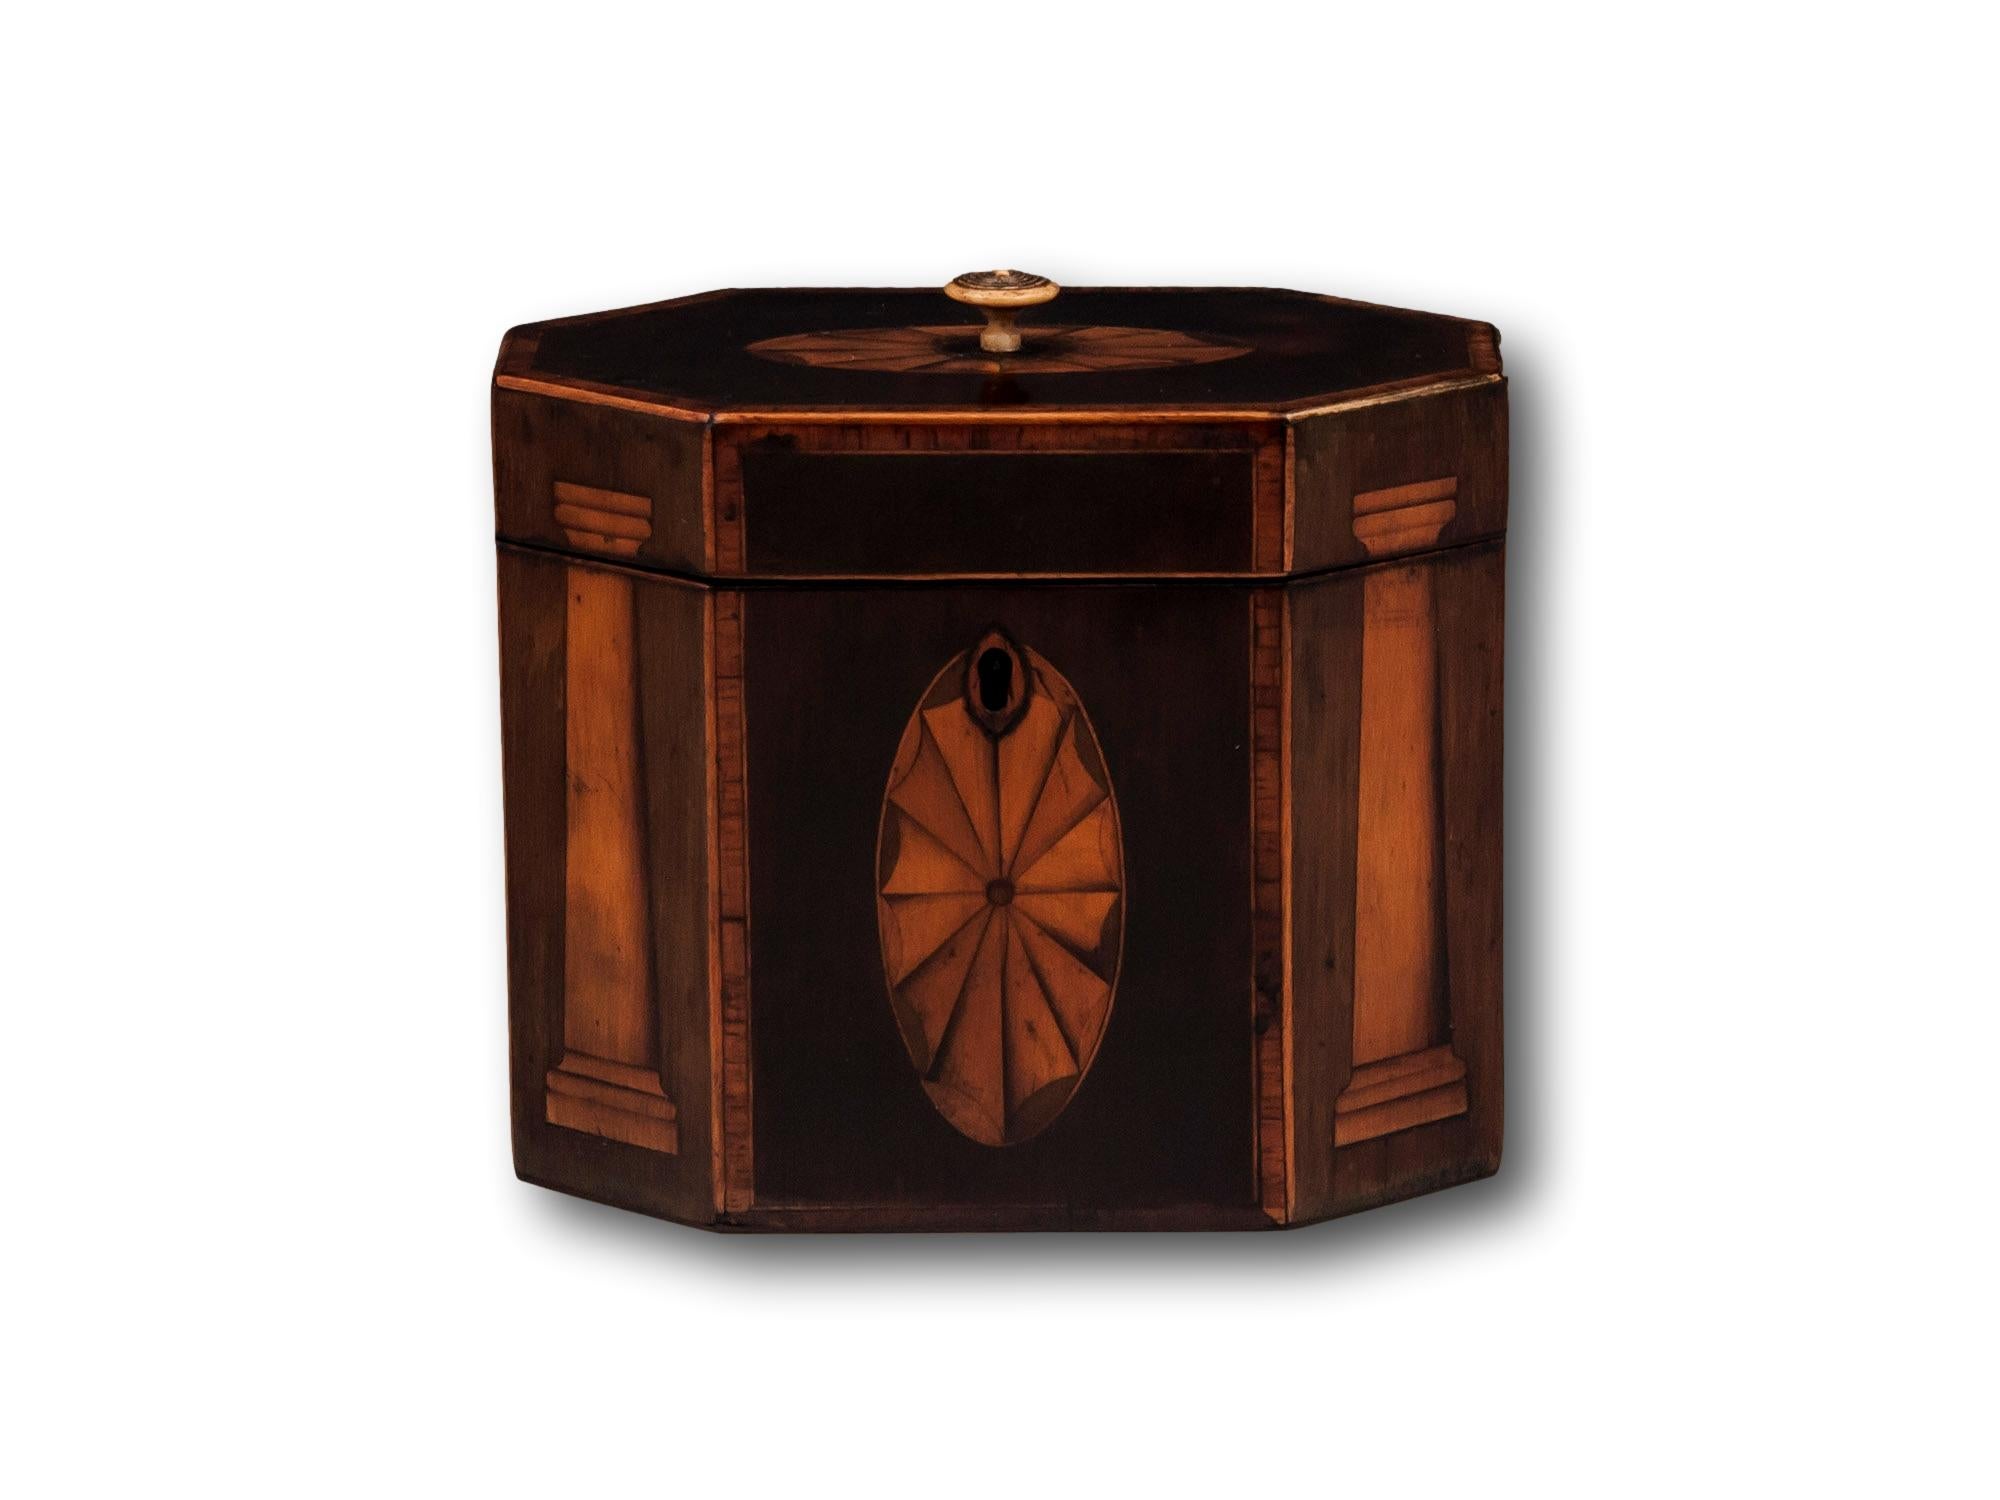 With Tuscan Columns & Fan Inlay.

From our Tea Caddy collection, we are pleased to offer this Georgian Harewood Tea Caddy. The Tea Caddy of octagonal shape with a Harewood veneer exterior and crossbanded Tulipwood with Boxwood edging. The front